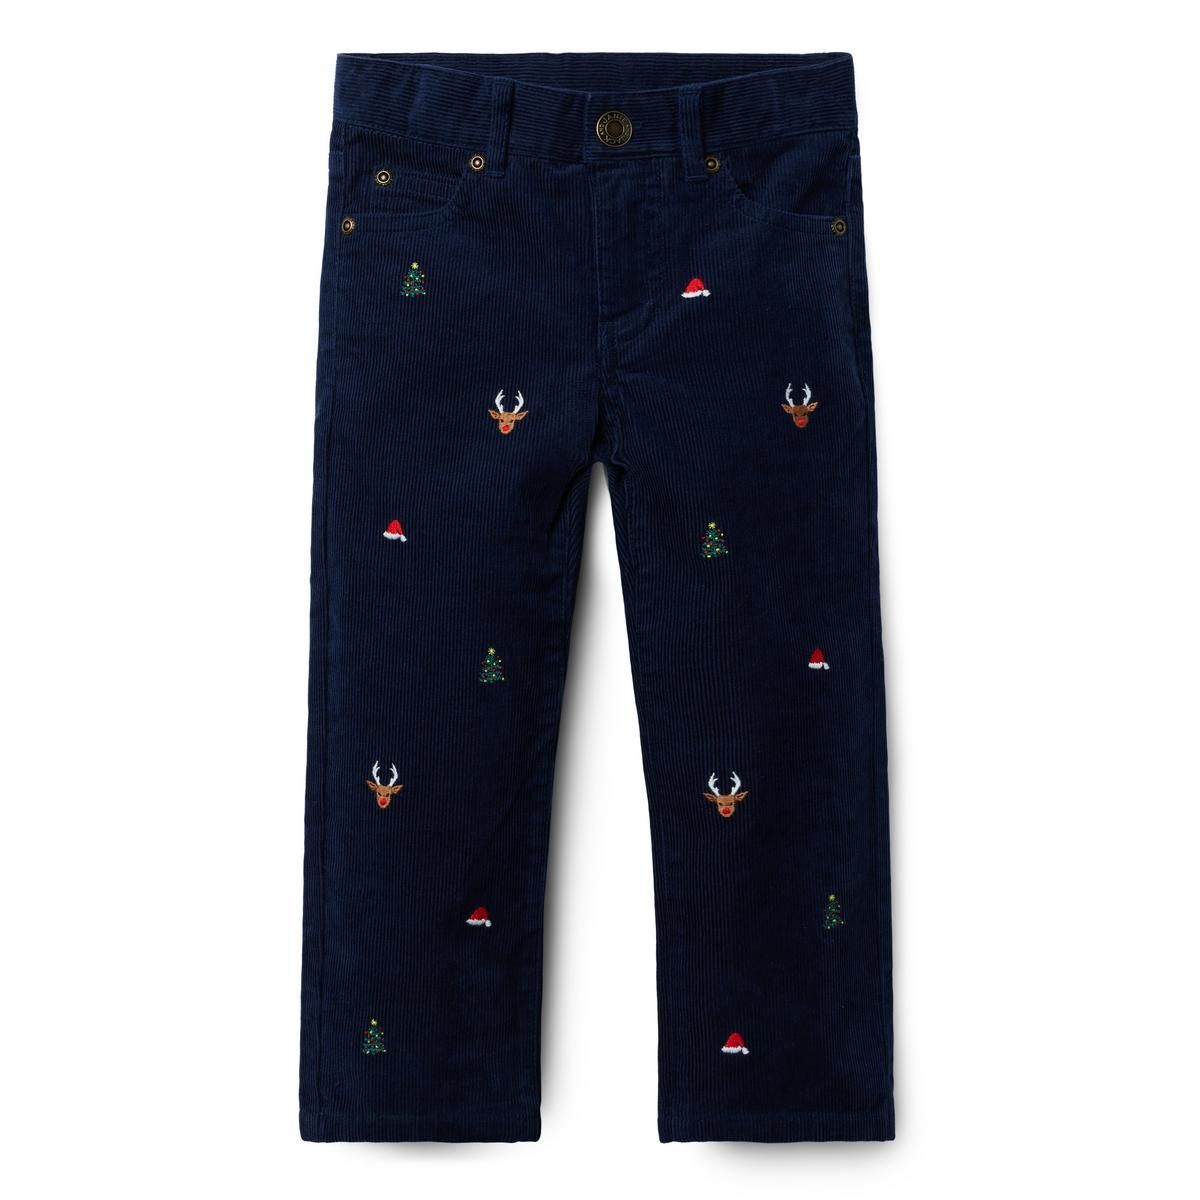 The Corduroy Holiday Pant | Janie and Jack